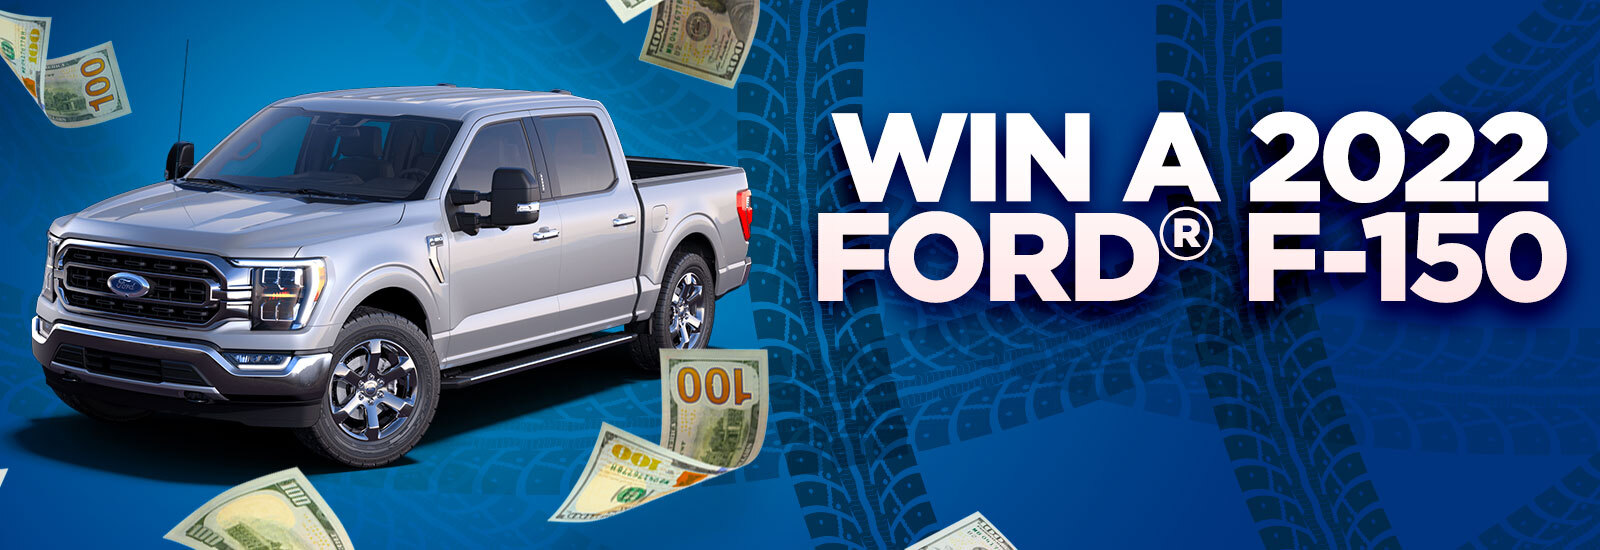 Win a 2022 Ford F-150